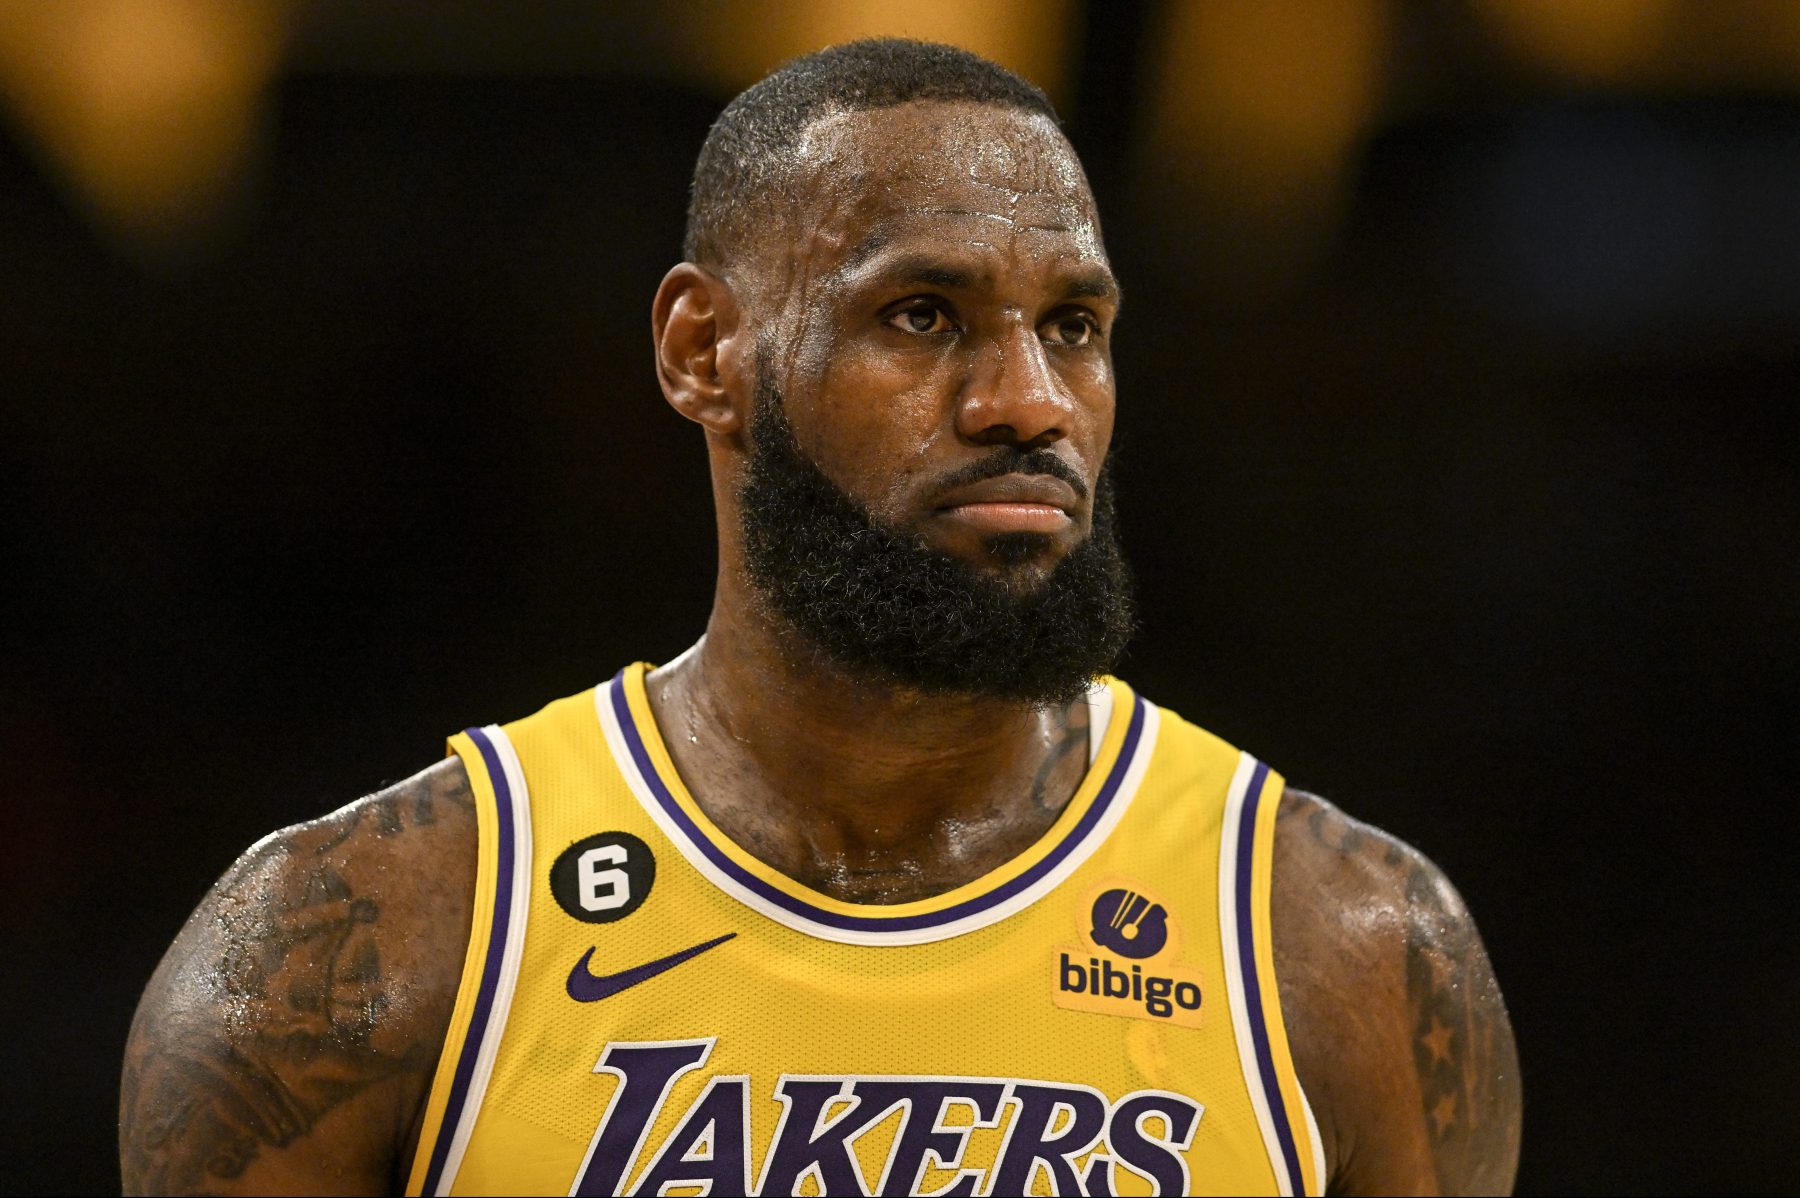 LeBron James Hints He's Retiring From NBA After Loss to Nuggets - InsideHook